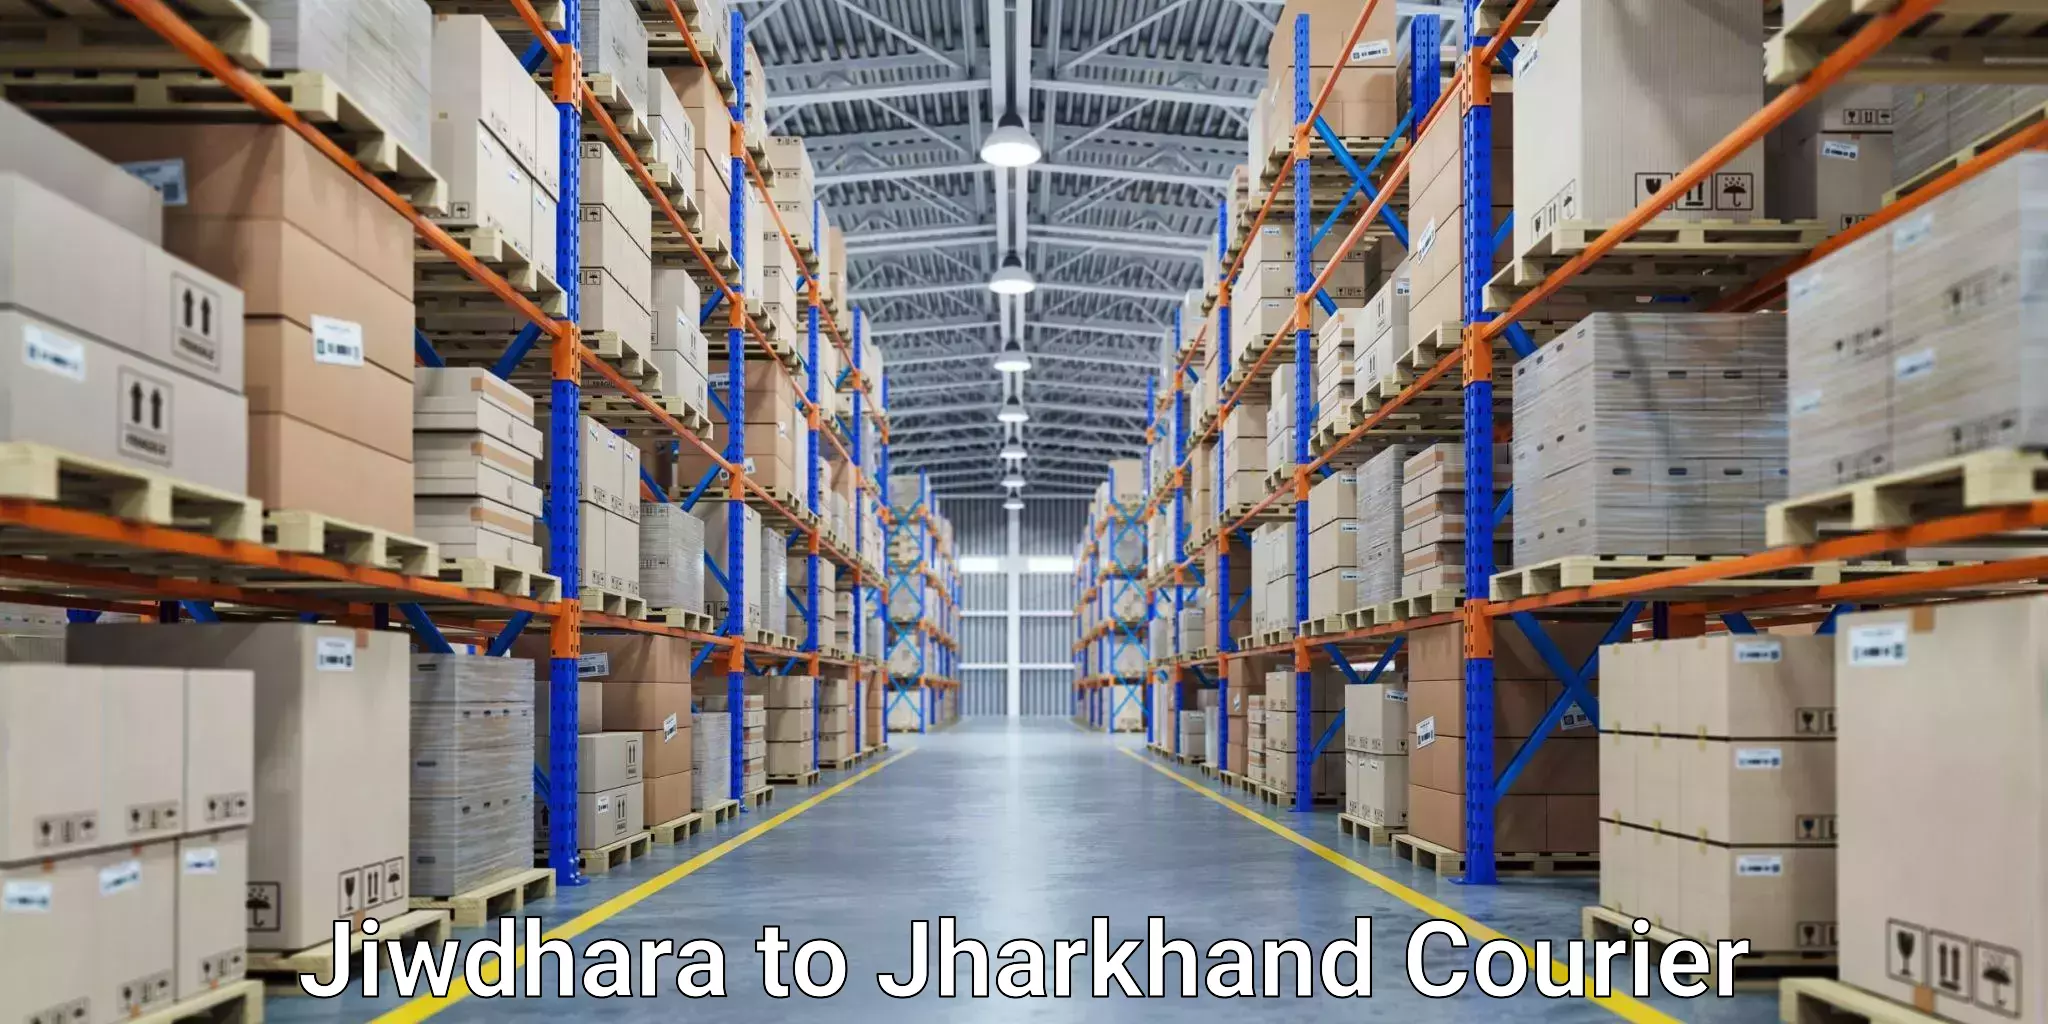 Parcel handling and care Jiwdhara to Boarijore